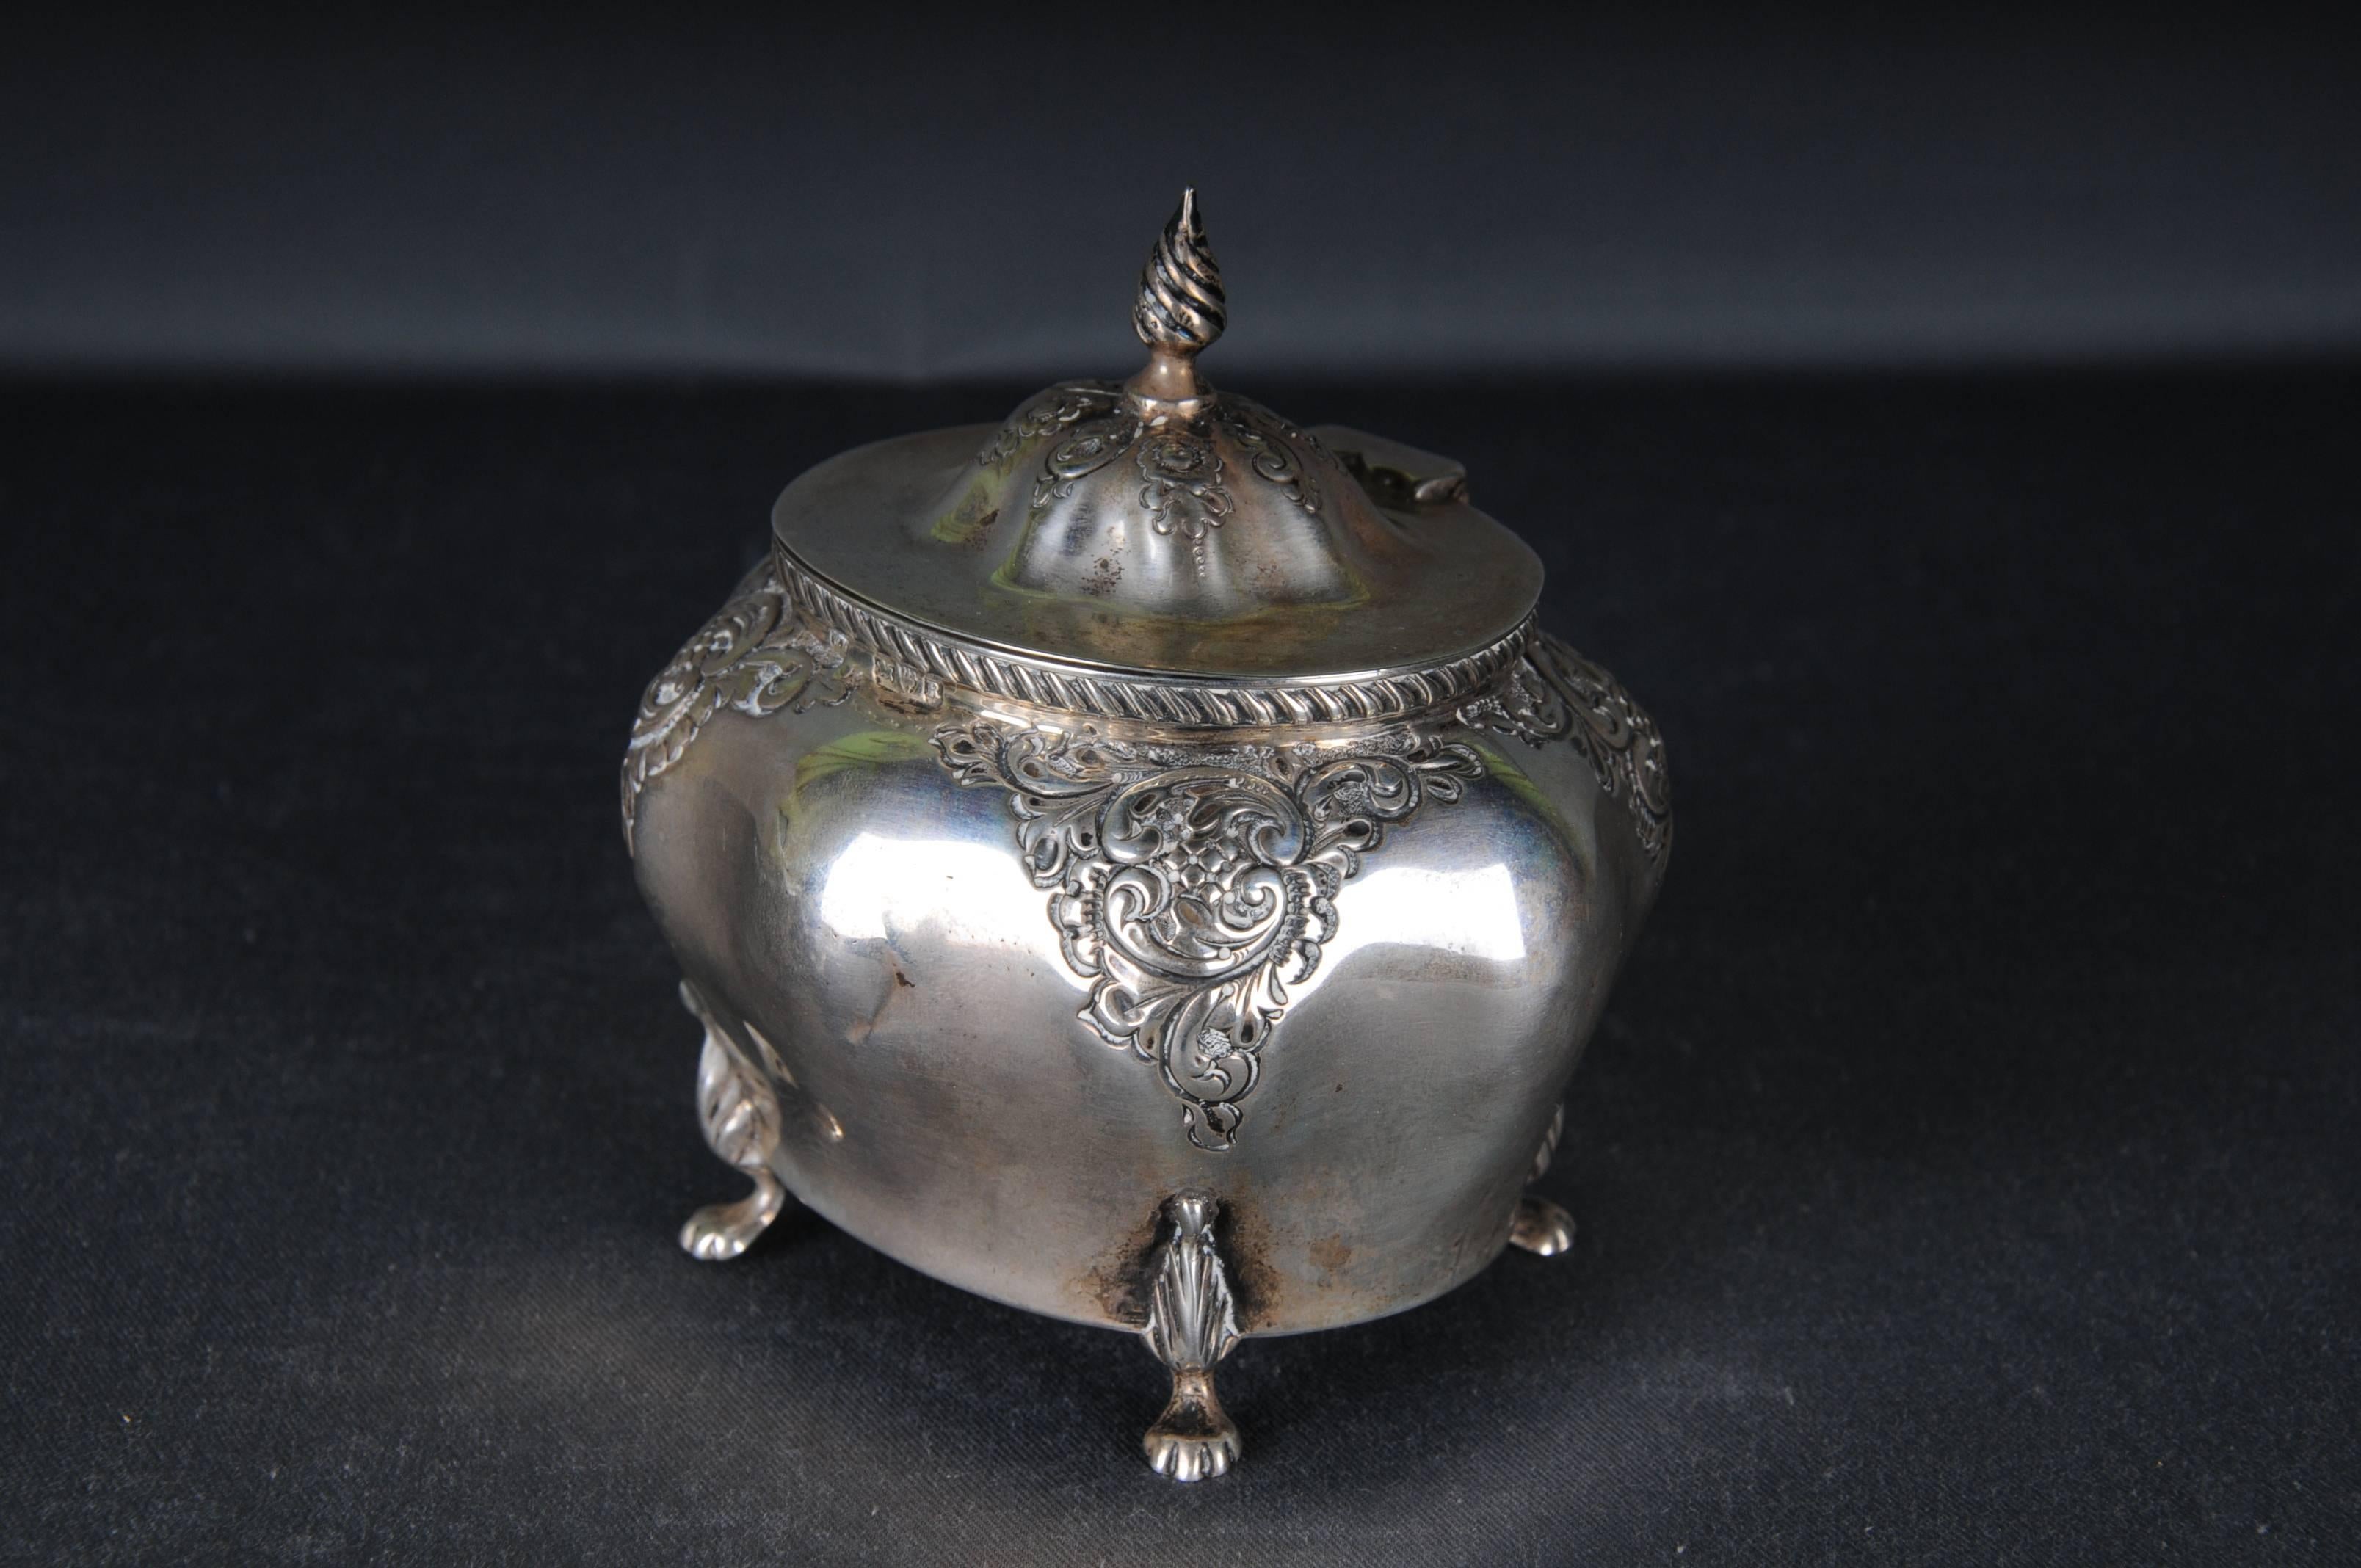 Antique Sterling Silver England Sugar bowls Box 925 Chester William Neale

Weight: 155 grams 

Condition can be seen in pictures